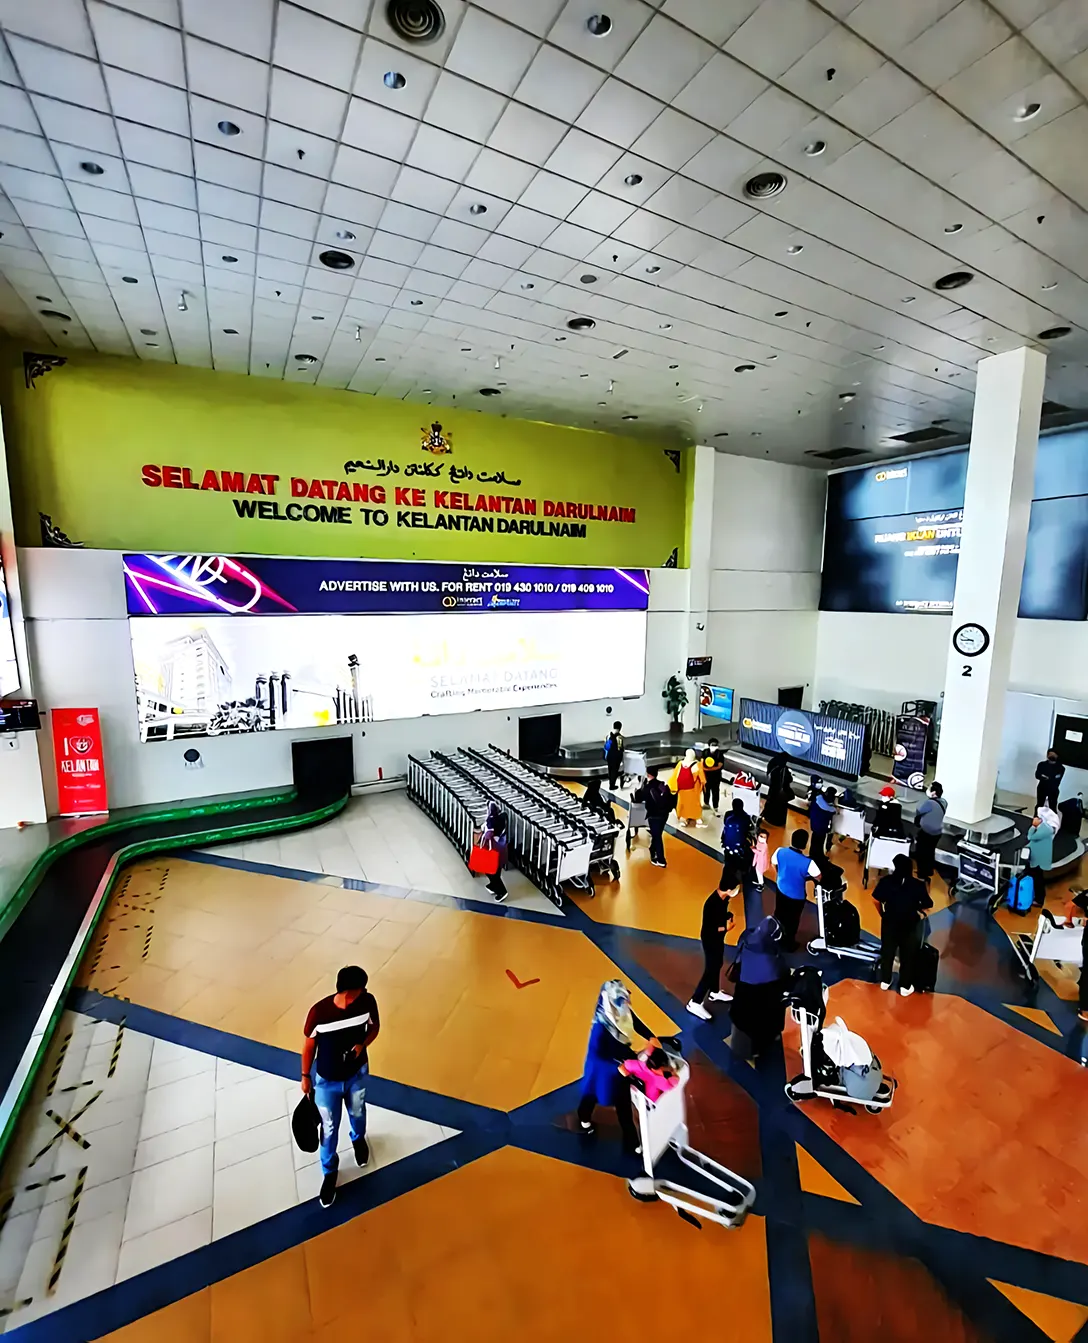 Arrival hall at the airport